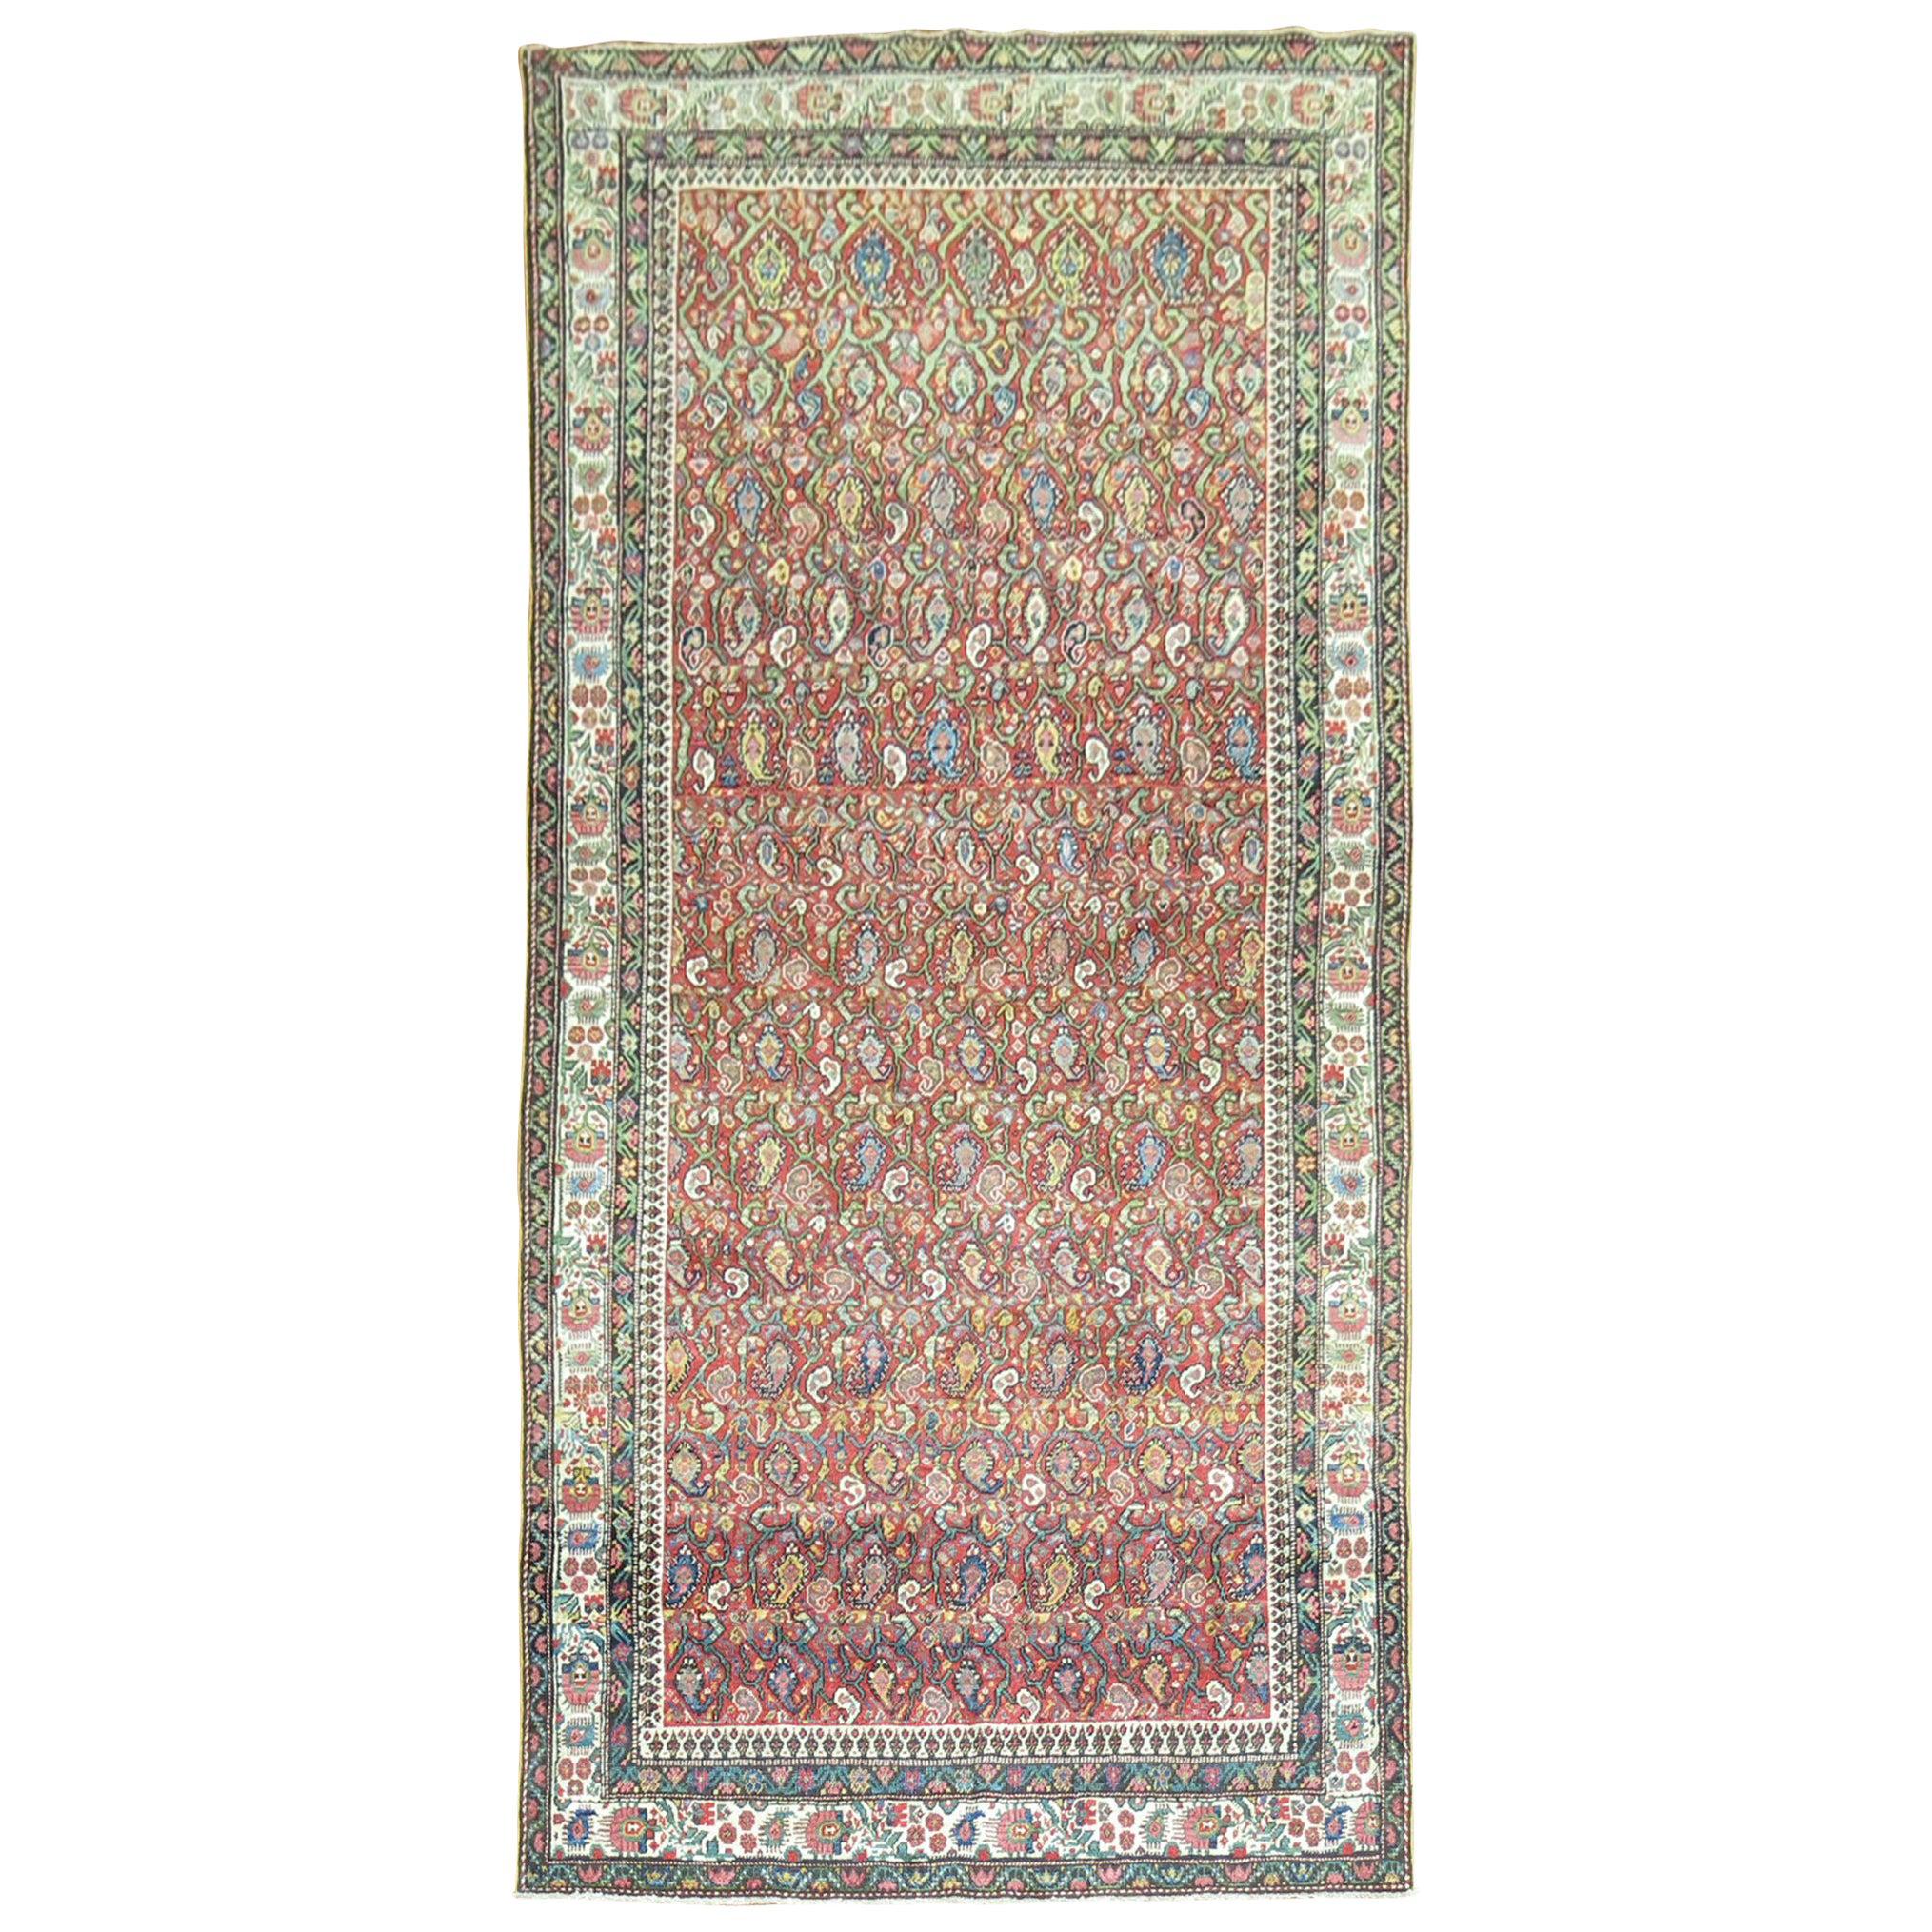 Tapis traditionnel persan Malayer Intermediate taille galerie rouge